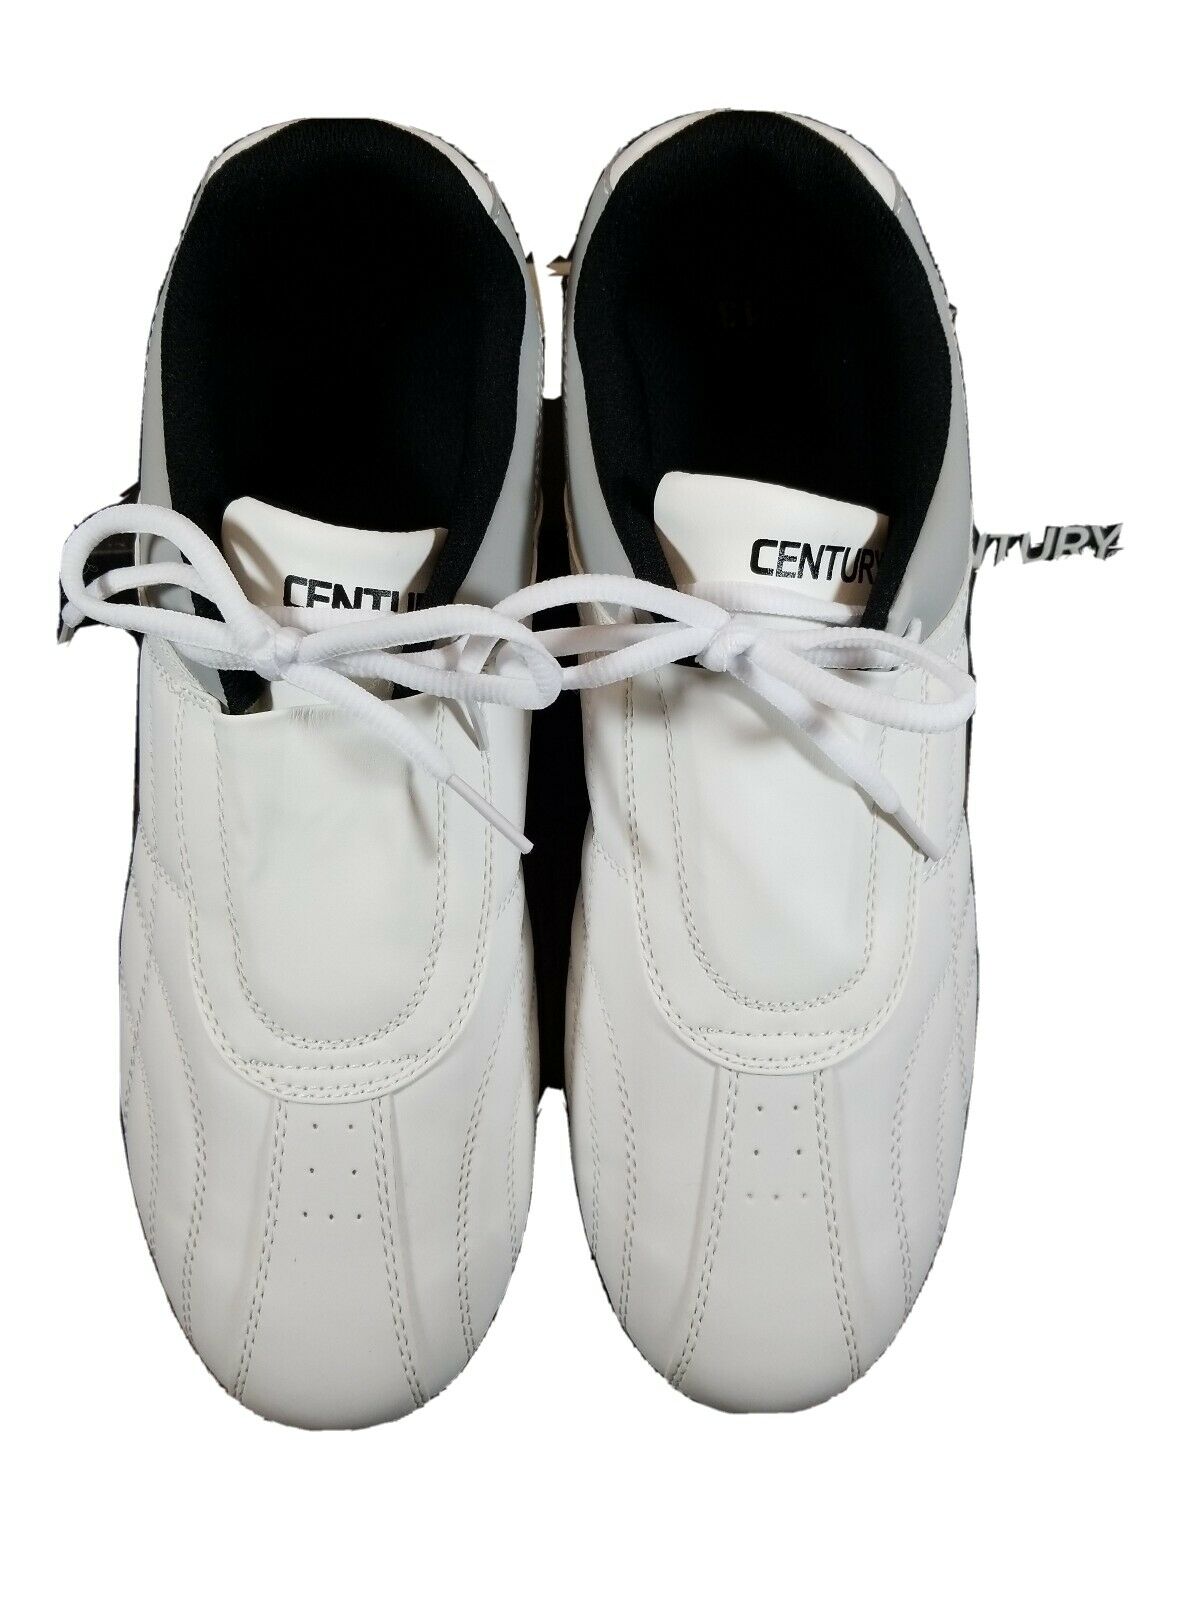 Century Lightfoot Martial Arts Sparring Shoes - White/Gray